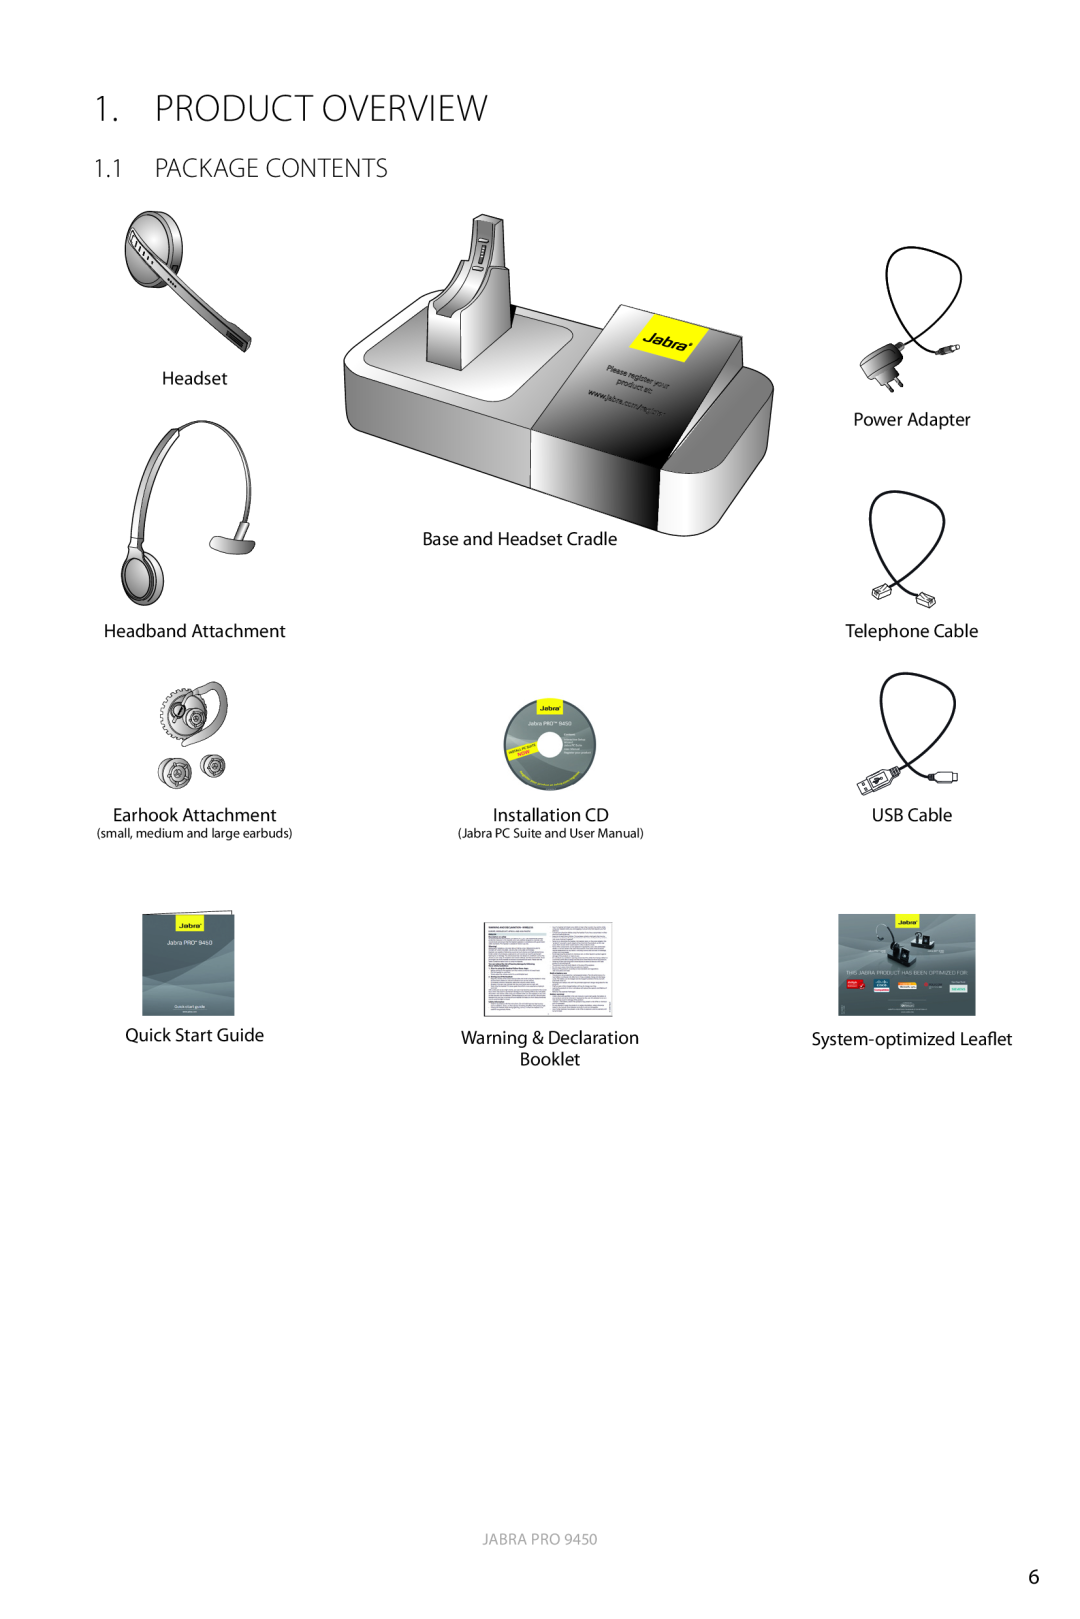 Jabra 9450 user manual Product Overview, 1.1PACKAGE CONTENTS, Jabra Pro, small, medium and large earbuds 